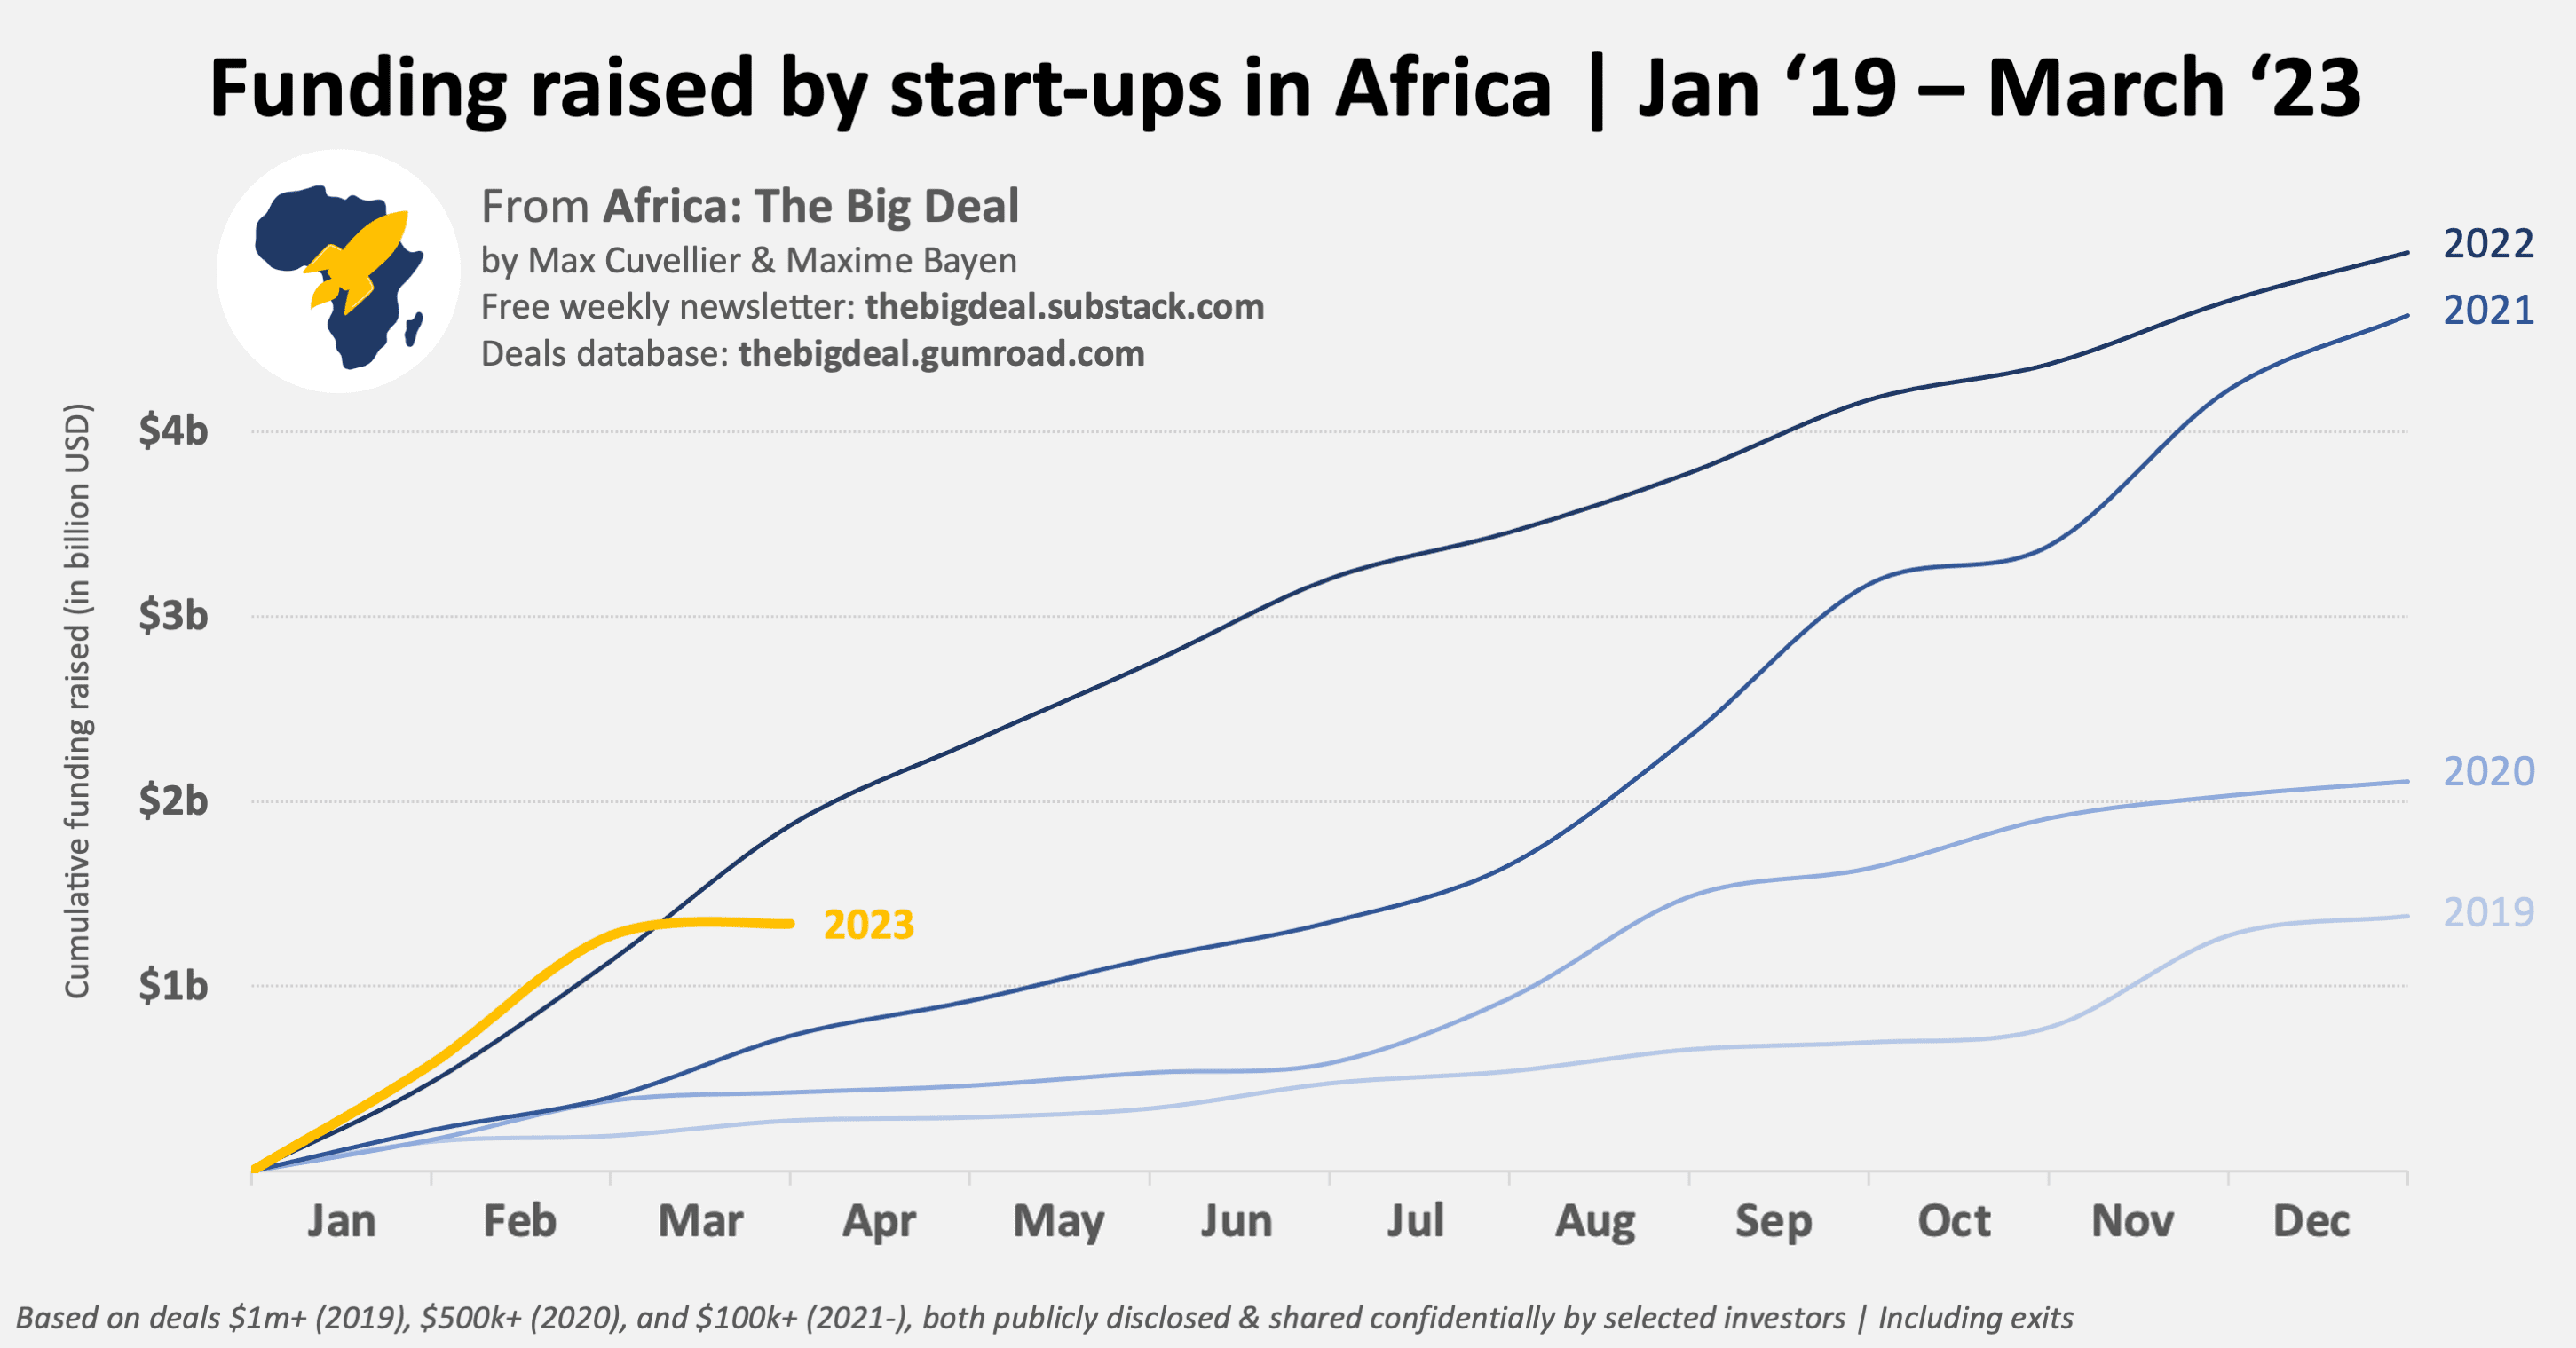 Venture Capital in Africa has been declining due to market fluctuations